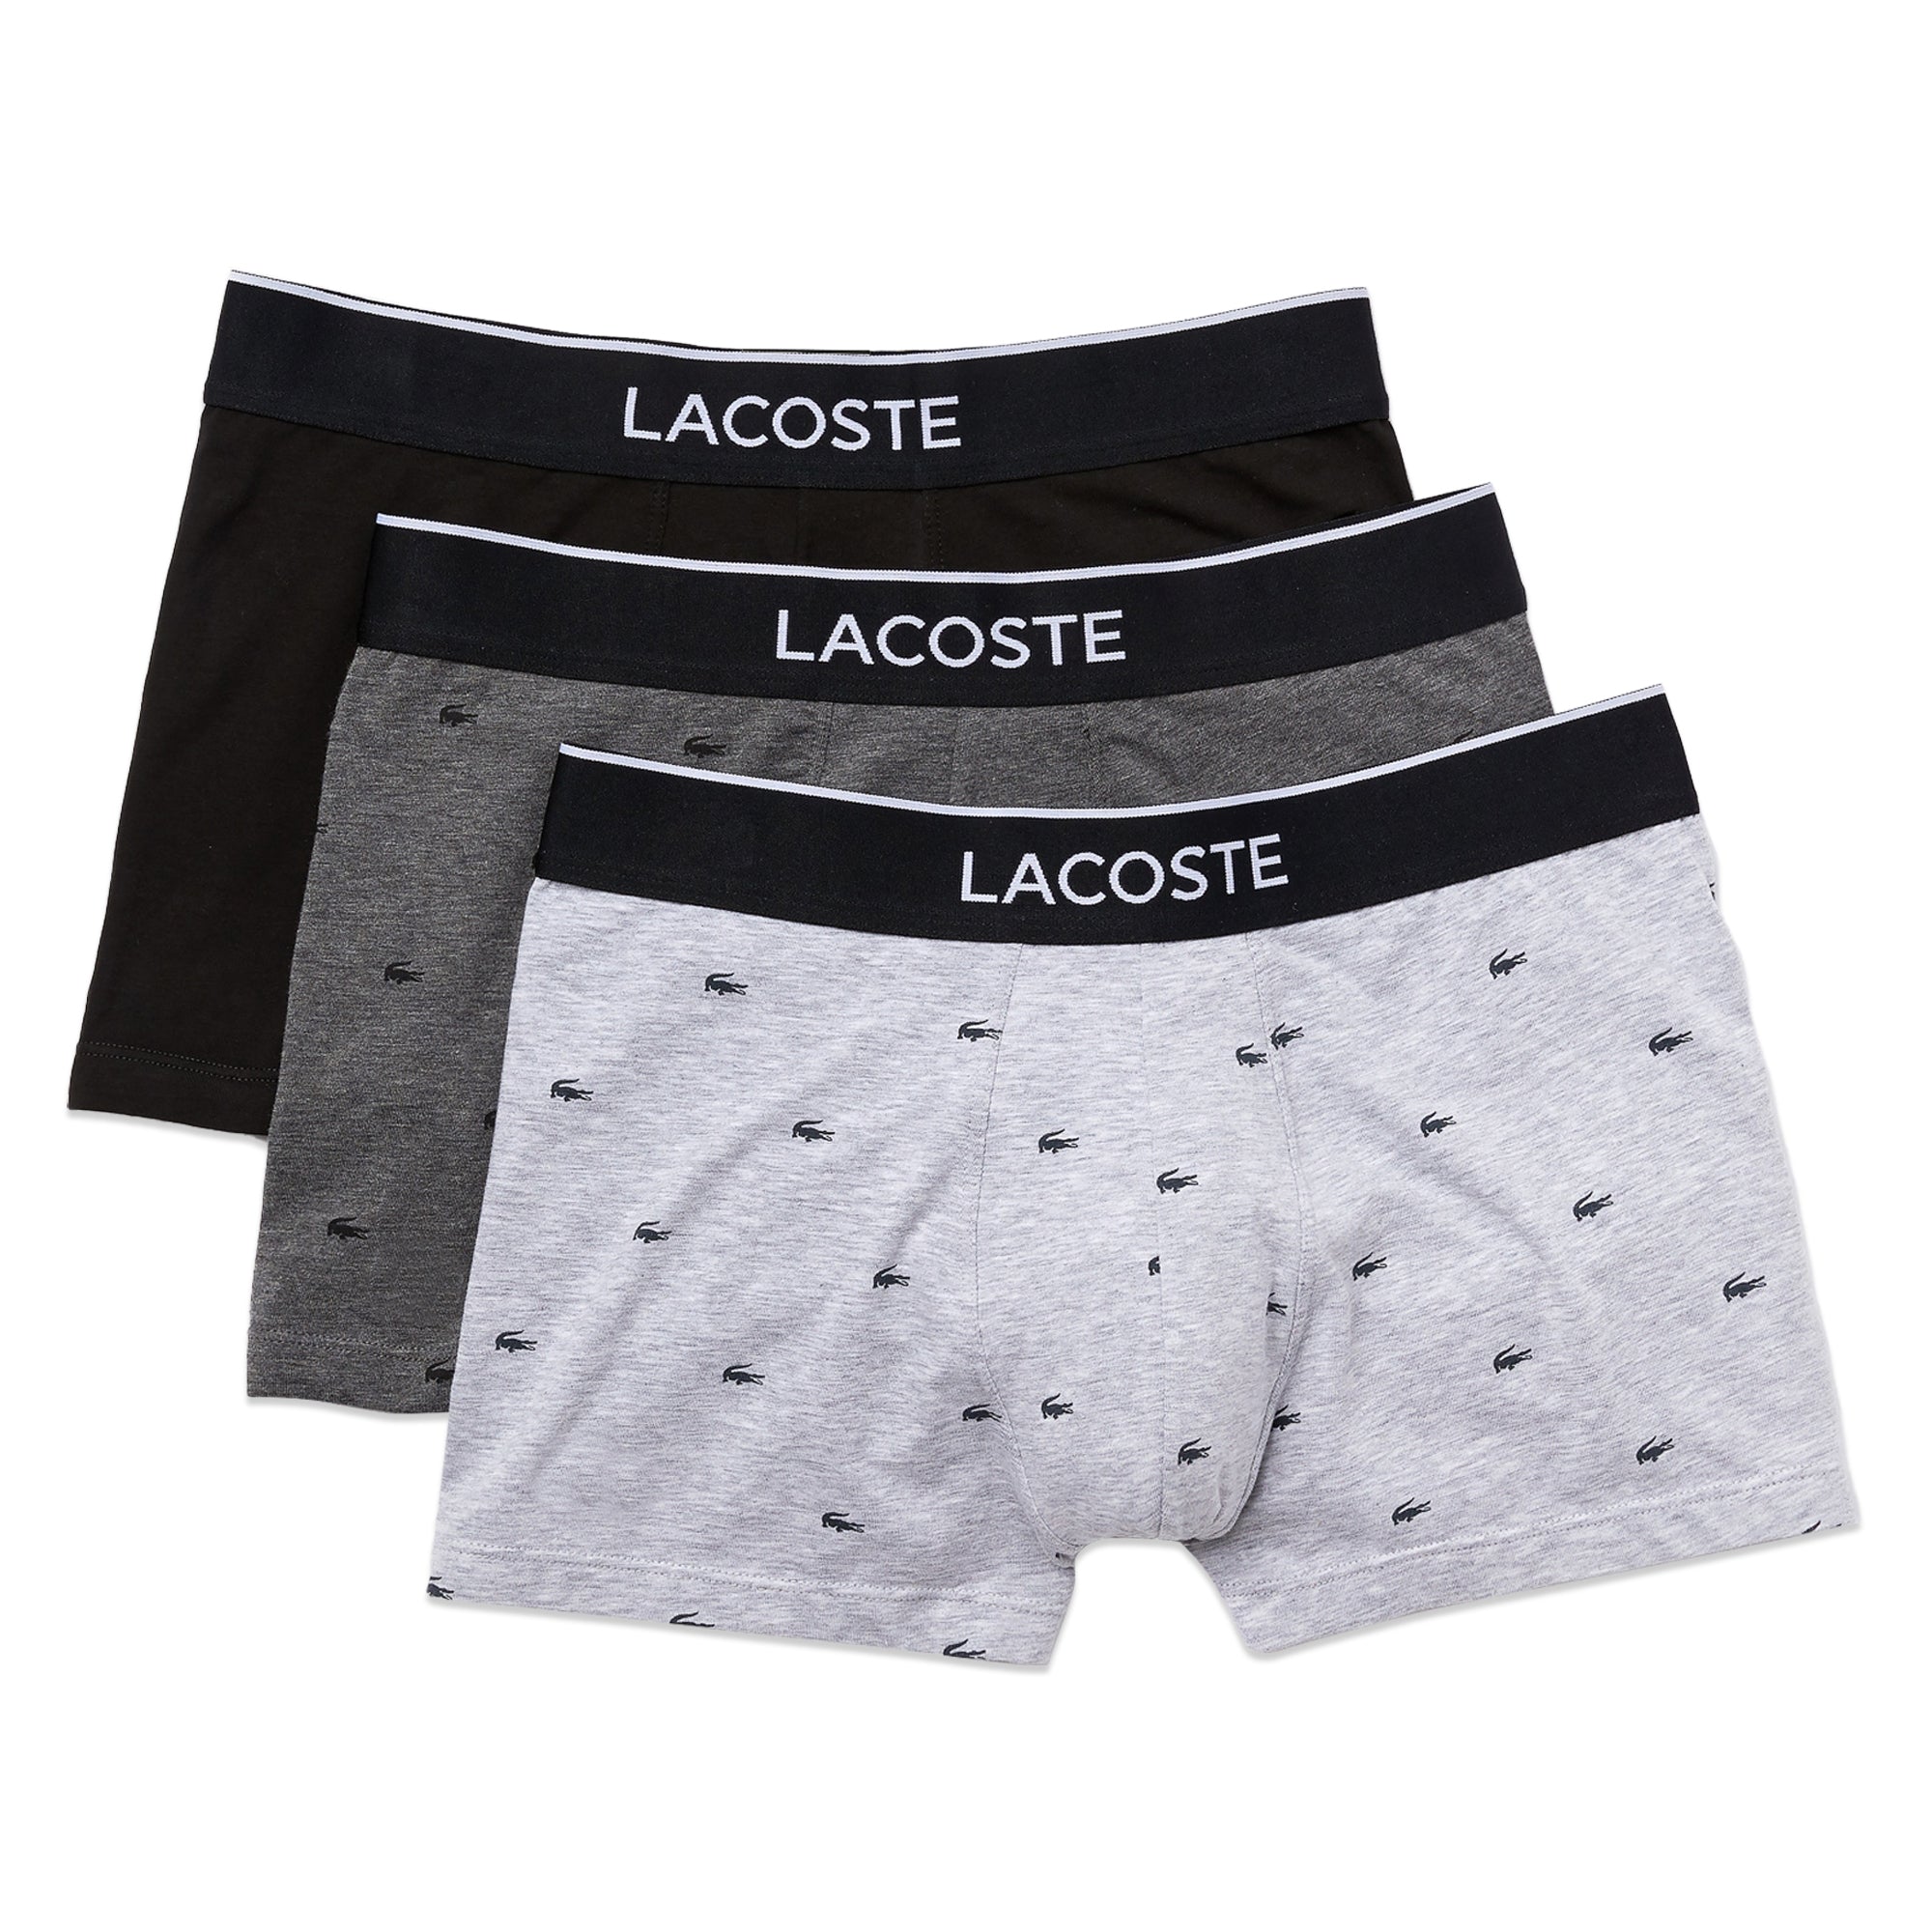 Lacoste 3 Pack Cotton Stretch Trunks - Black/Charcoal/Grey Crocs